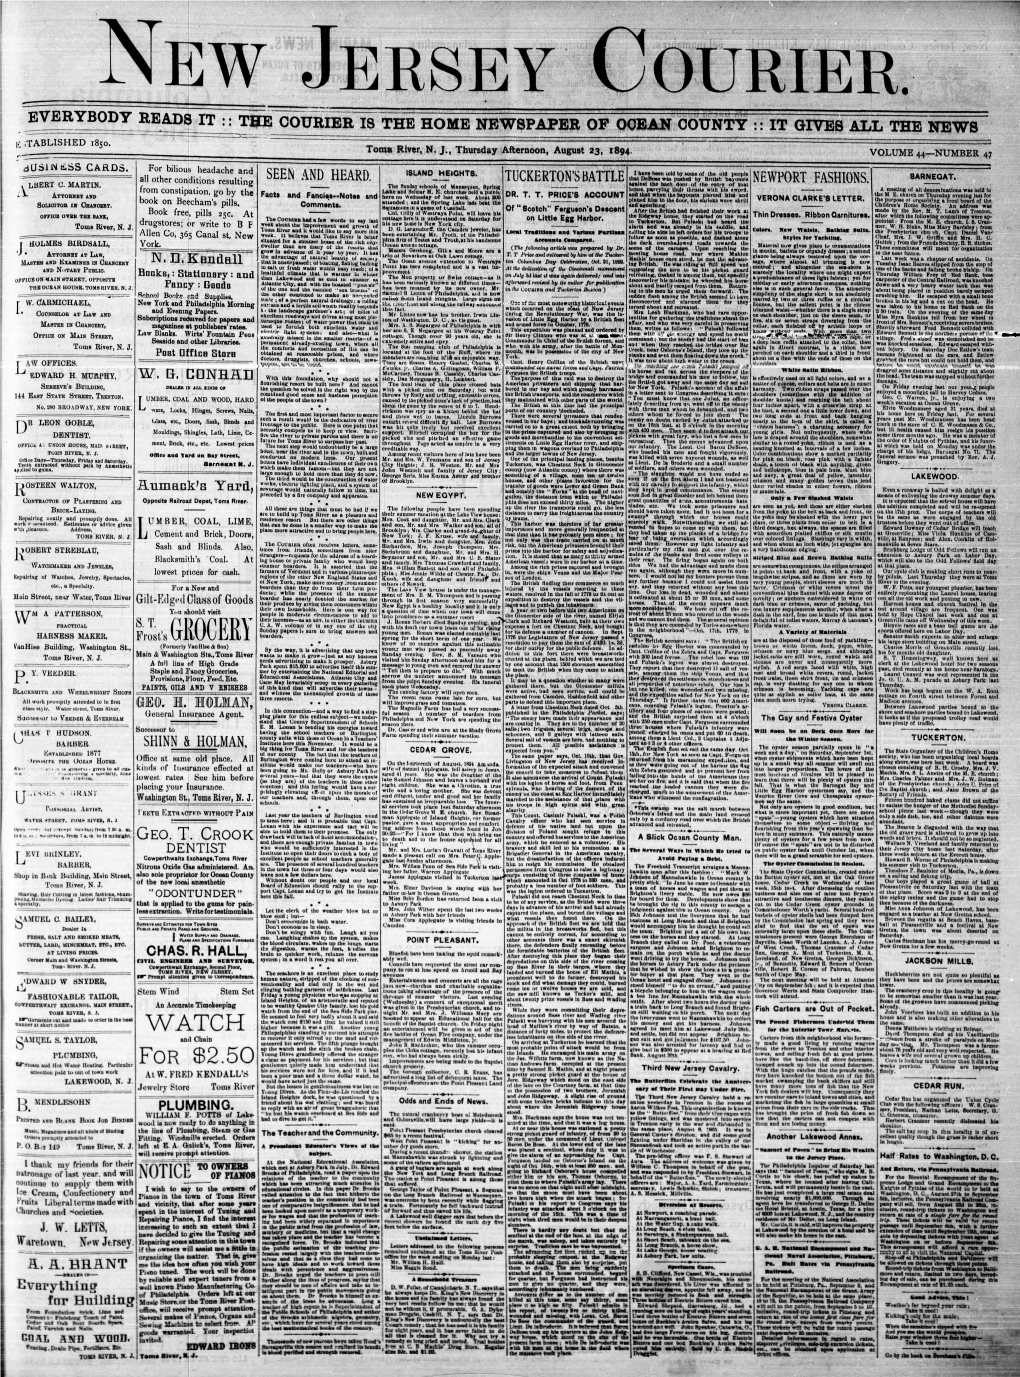 New Jersey Courier. EVERYBODY READS IT :: the COURIER IS the HOME NEWSPAPER of OCEAN COUNTY :: IT GIVES ALL the NEWS Li .TABLISHED 1850